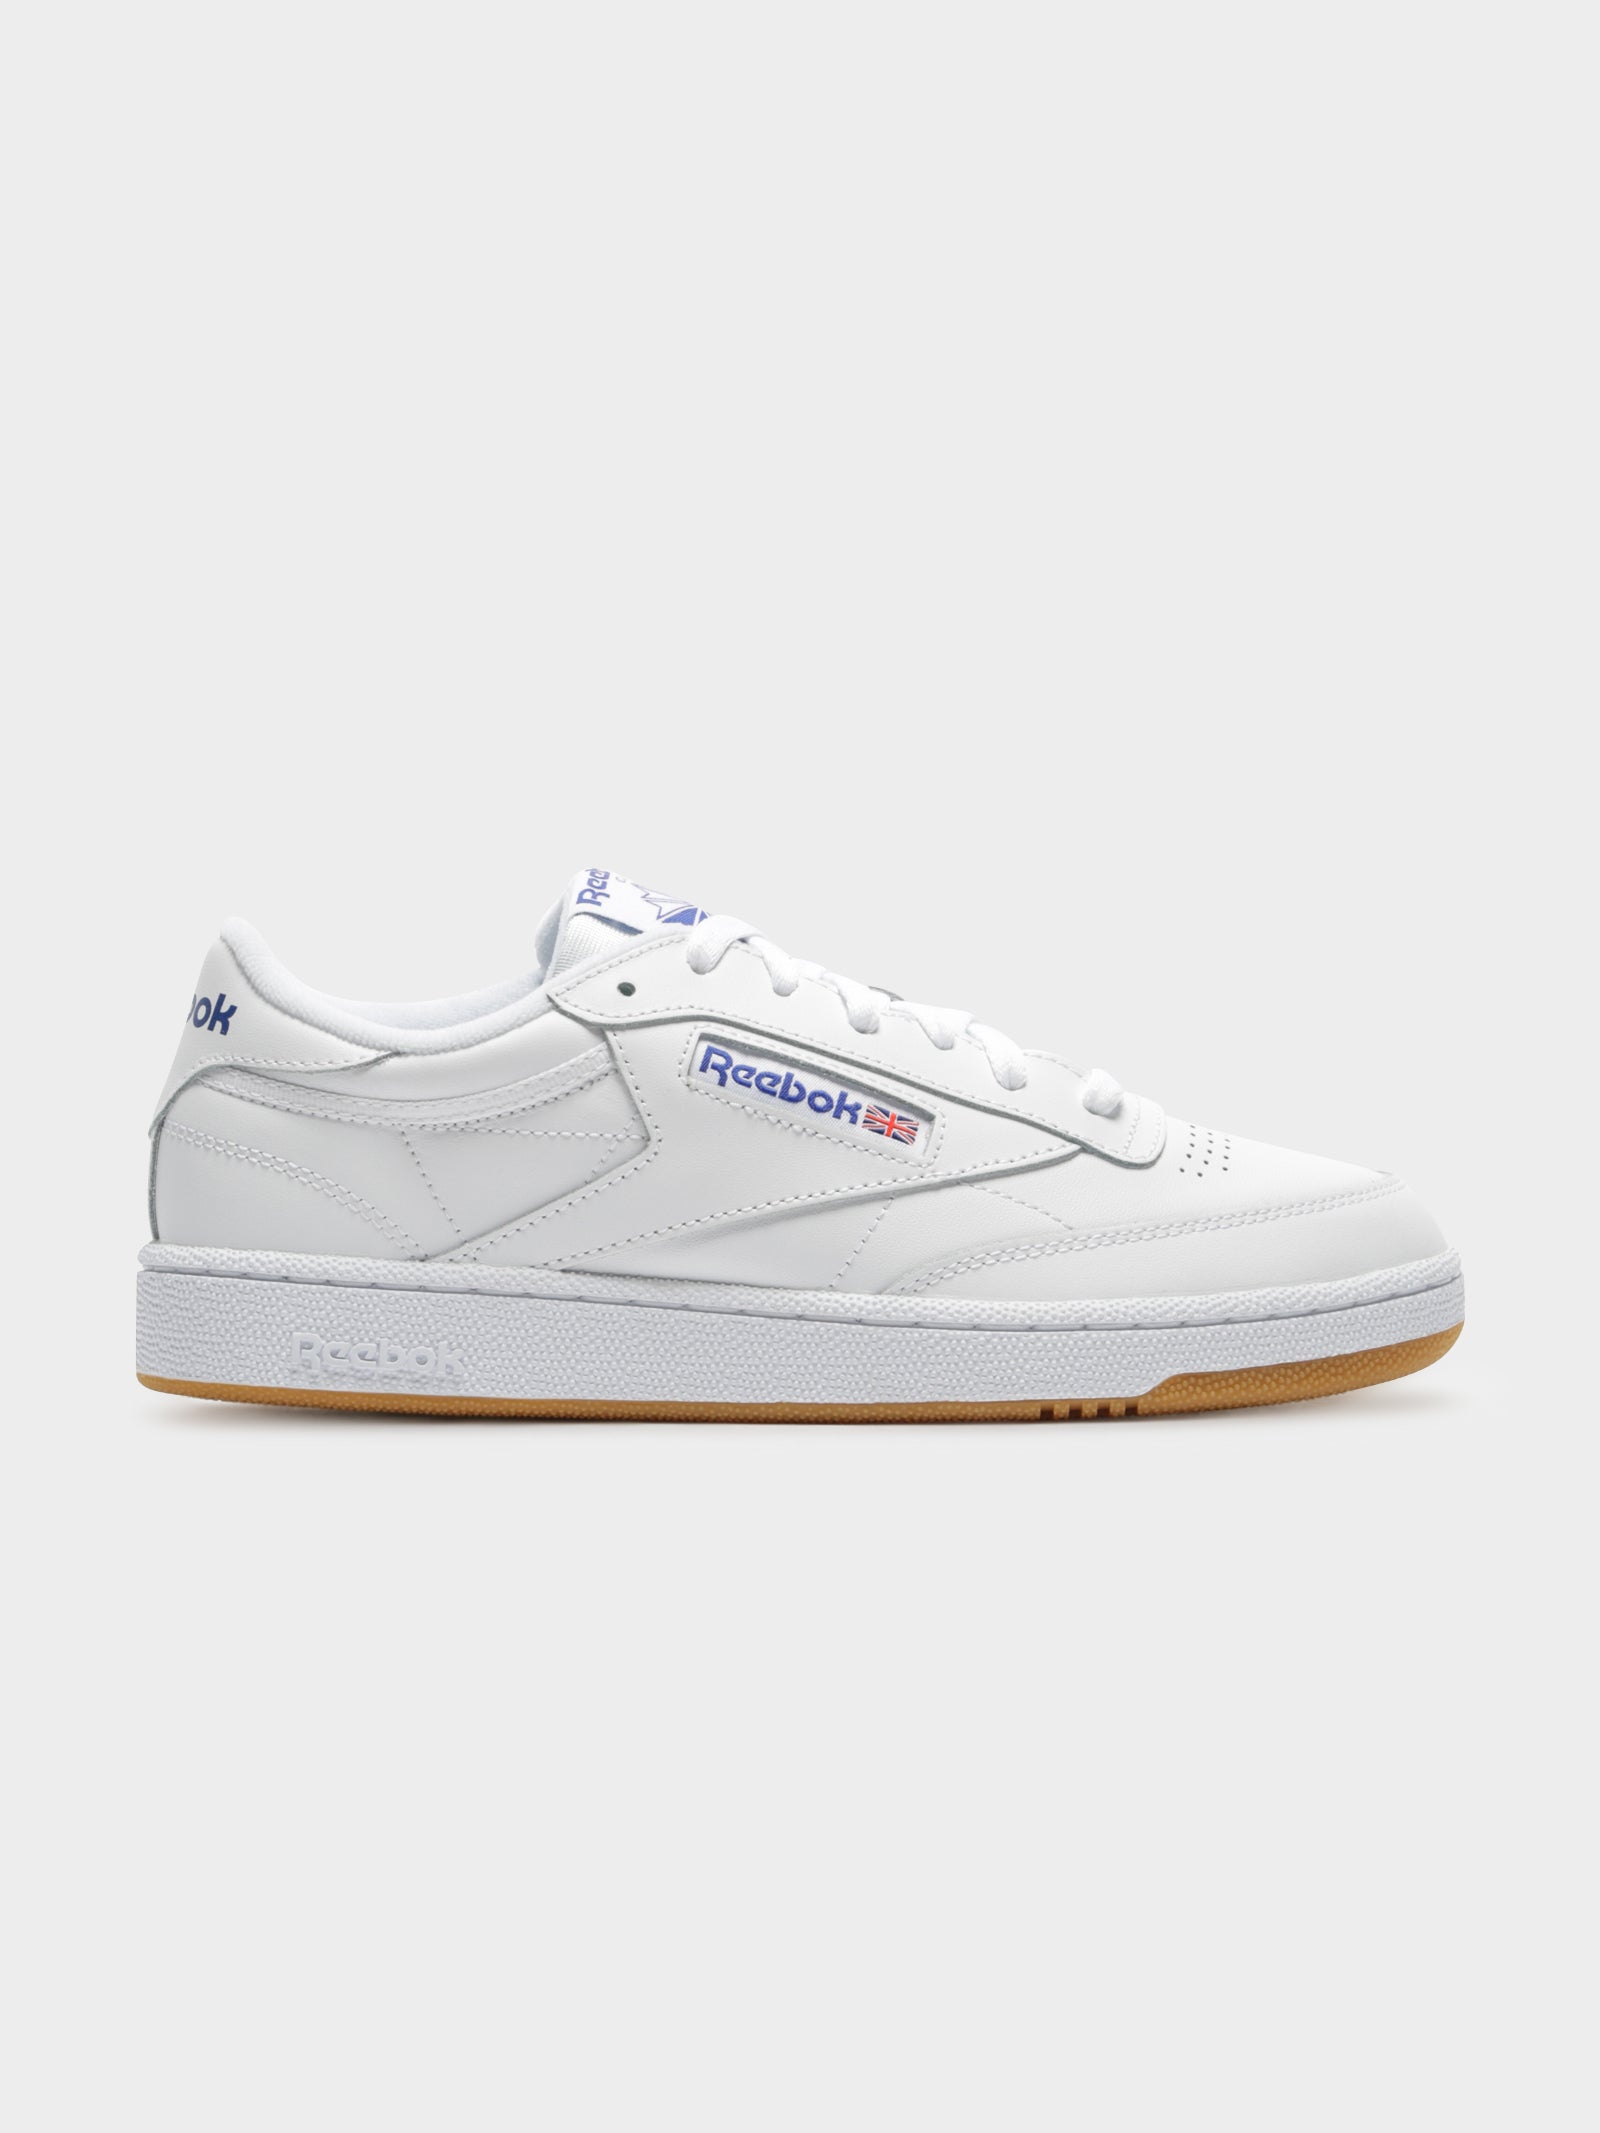 Unisex Club C 85 Sneakers in White & Blue